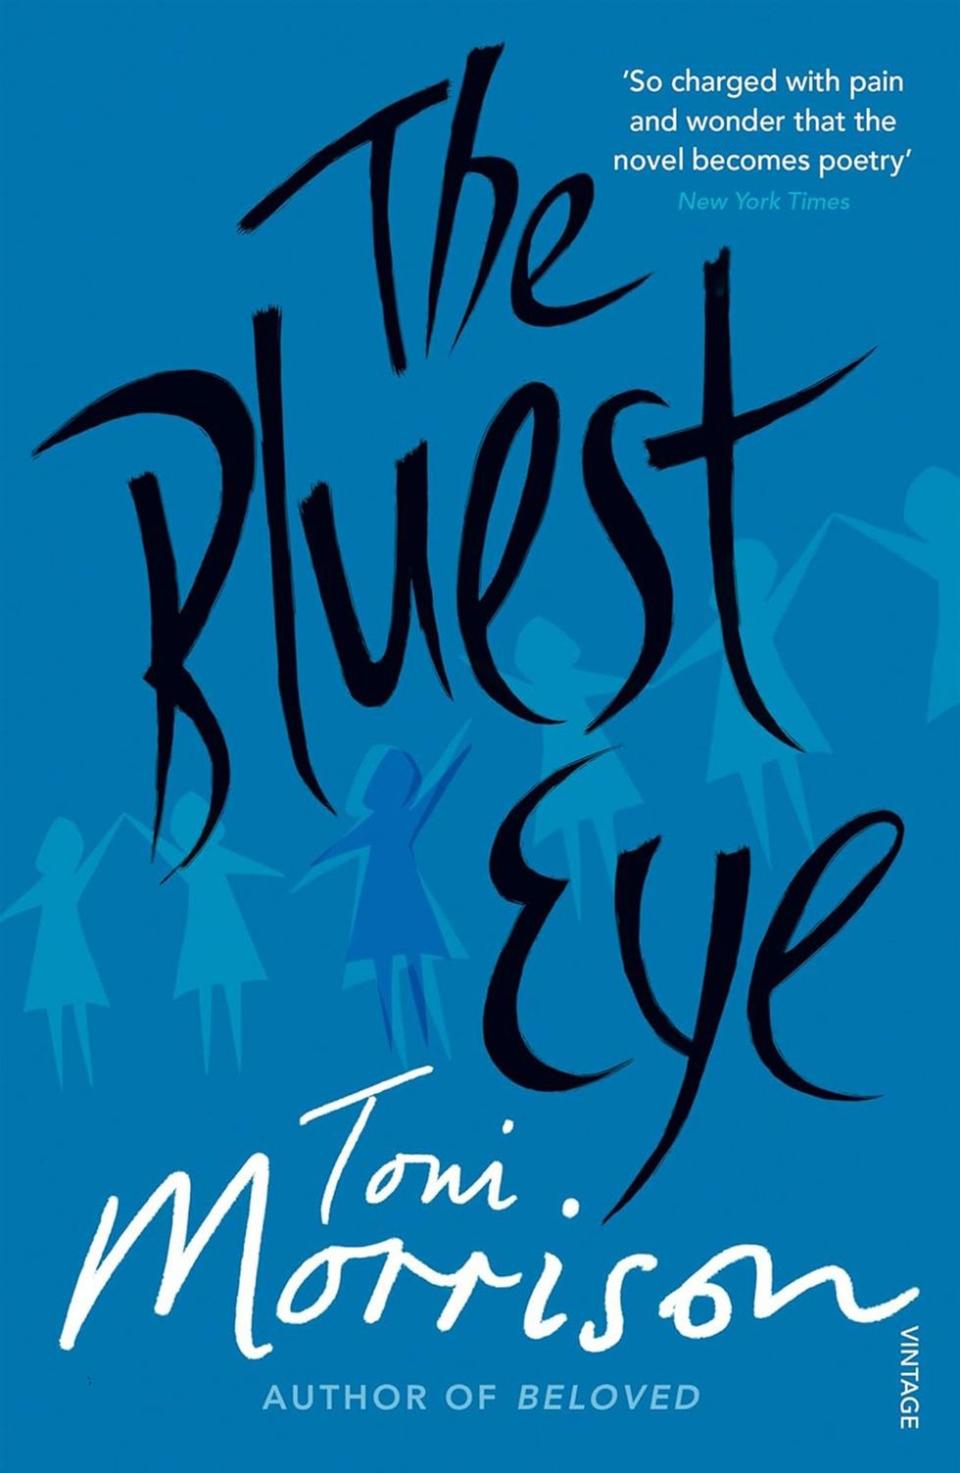 Here Are the Top Books Banned by K-12 Schools - 2. \u2018The Bluest Eye\u2019